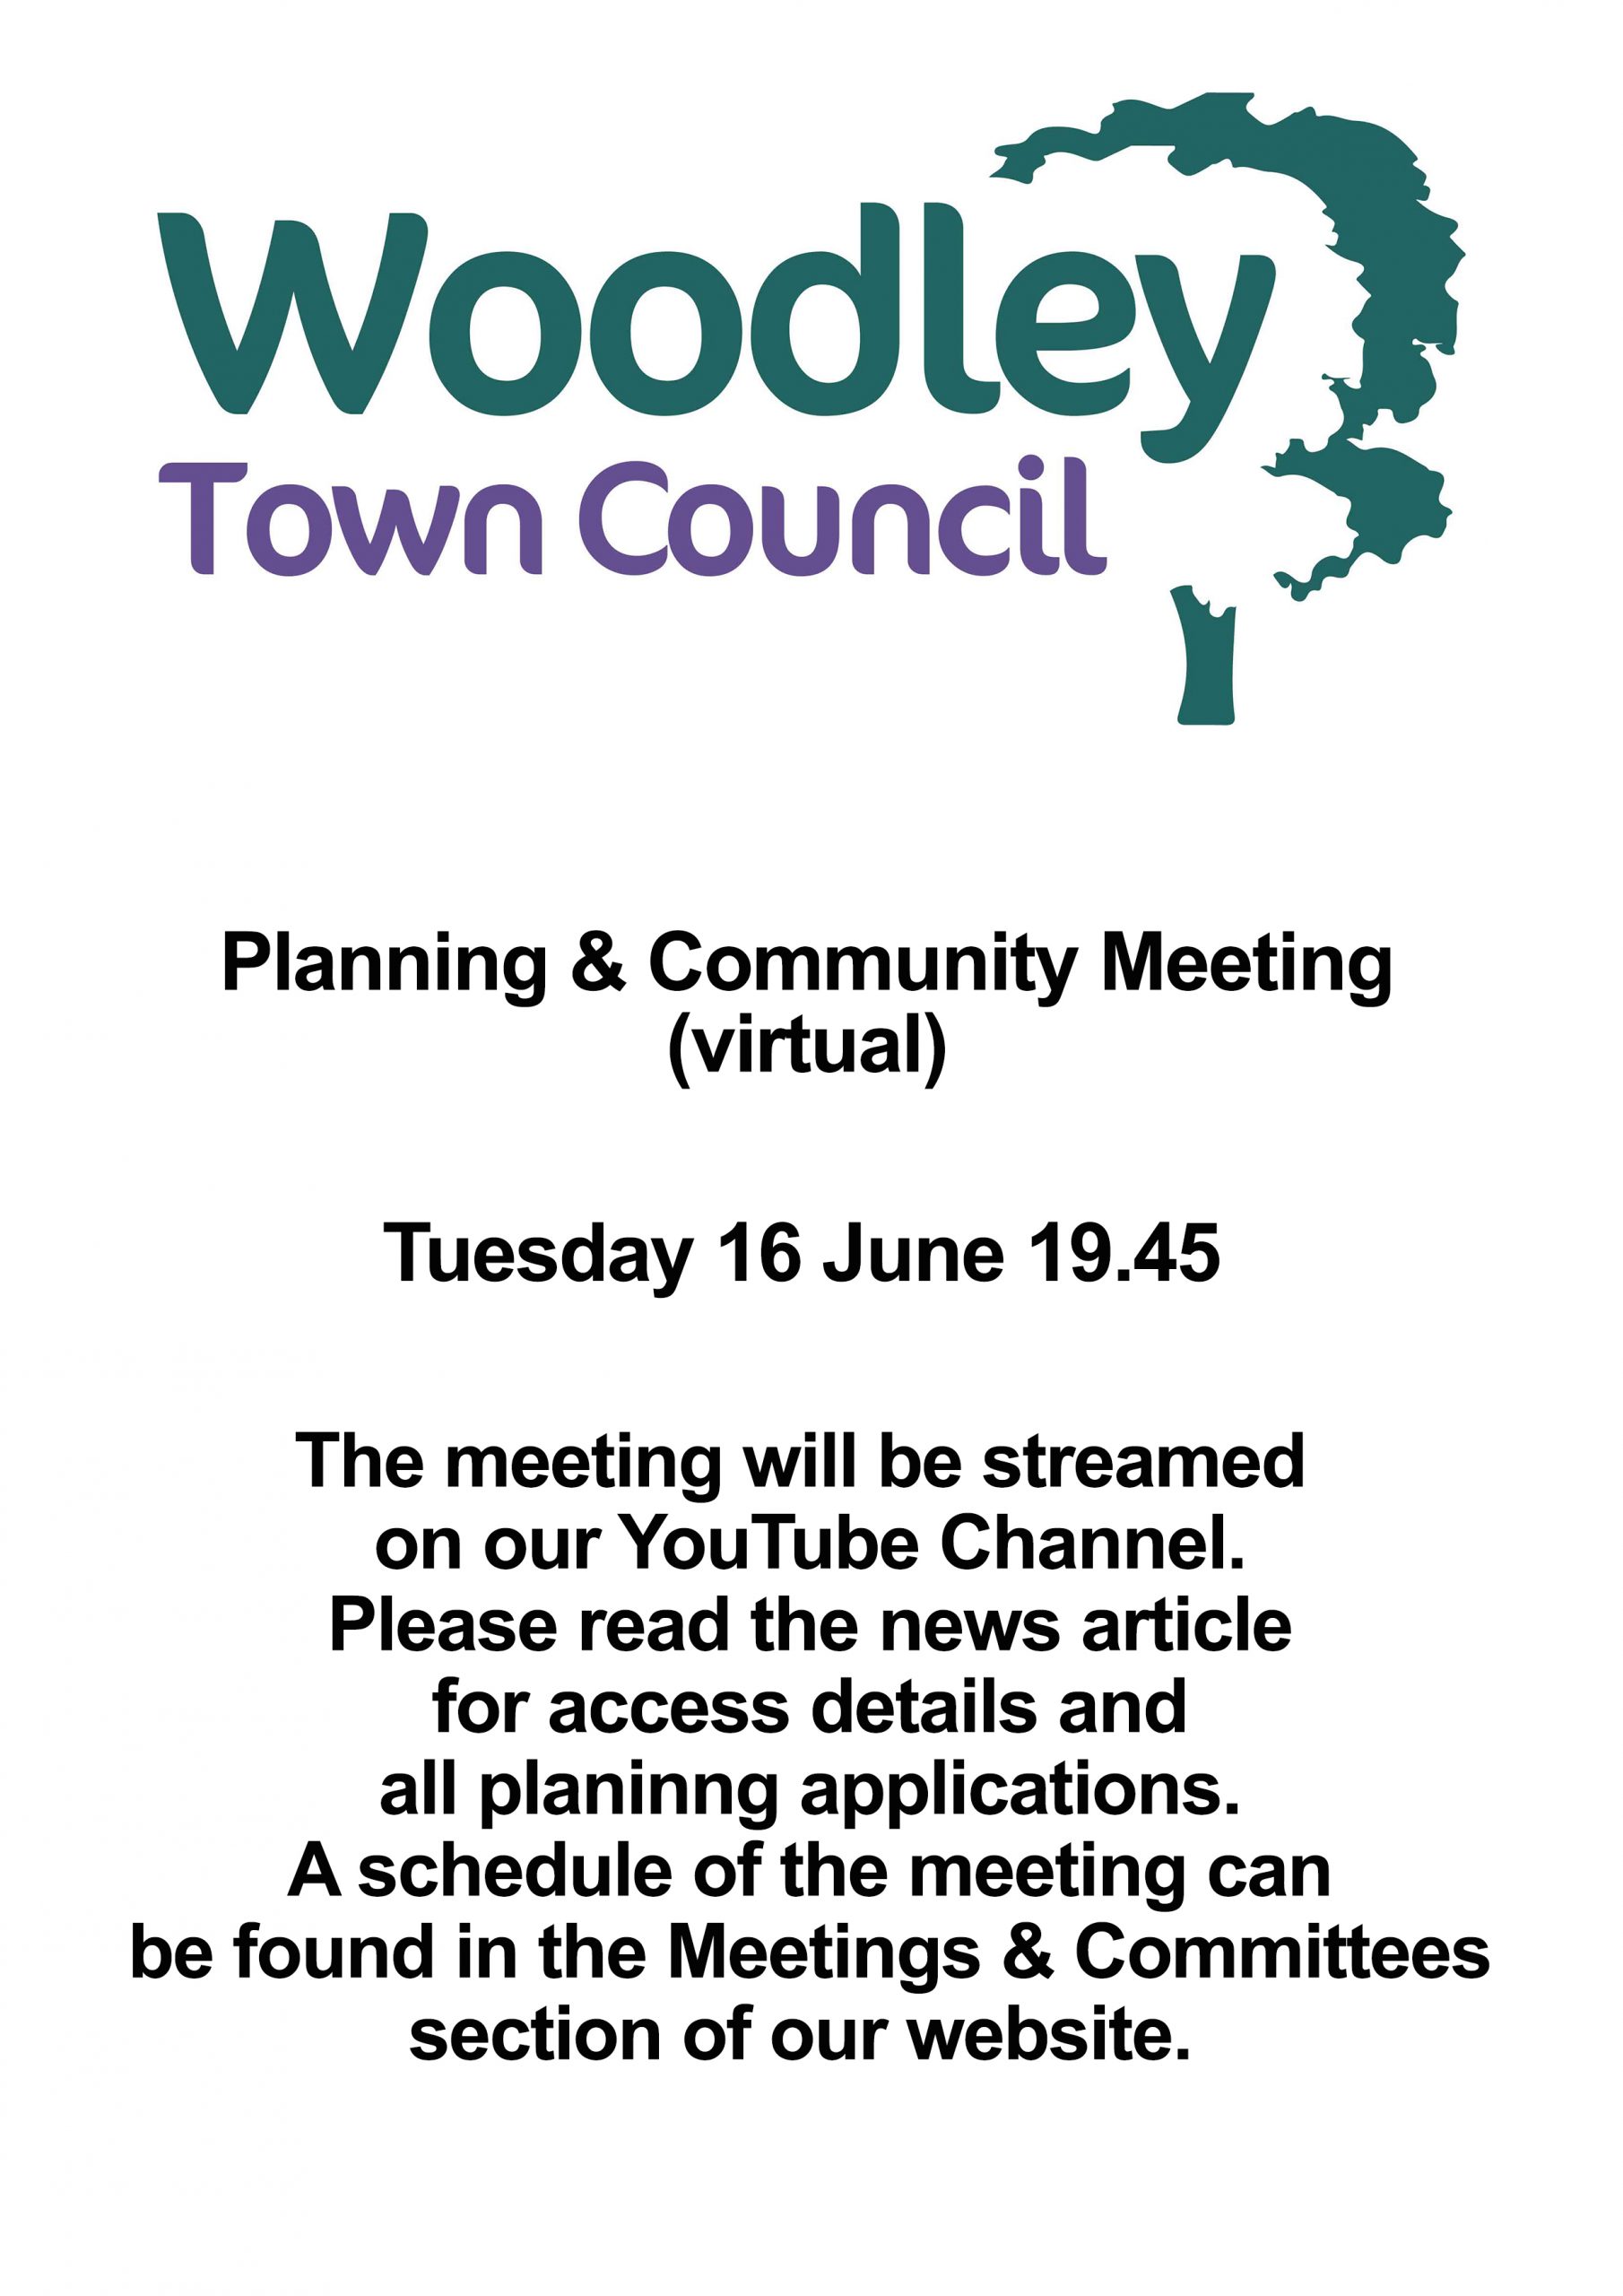 Woodley town council planning committee